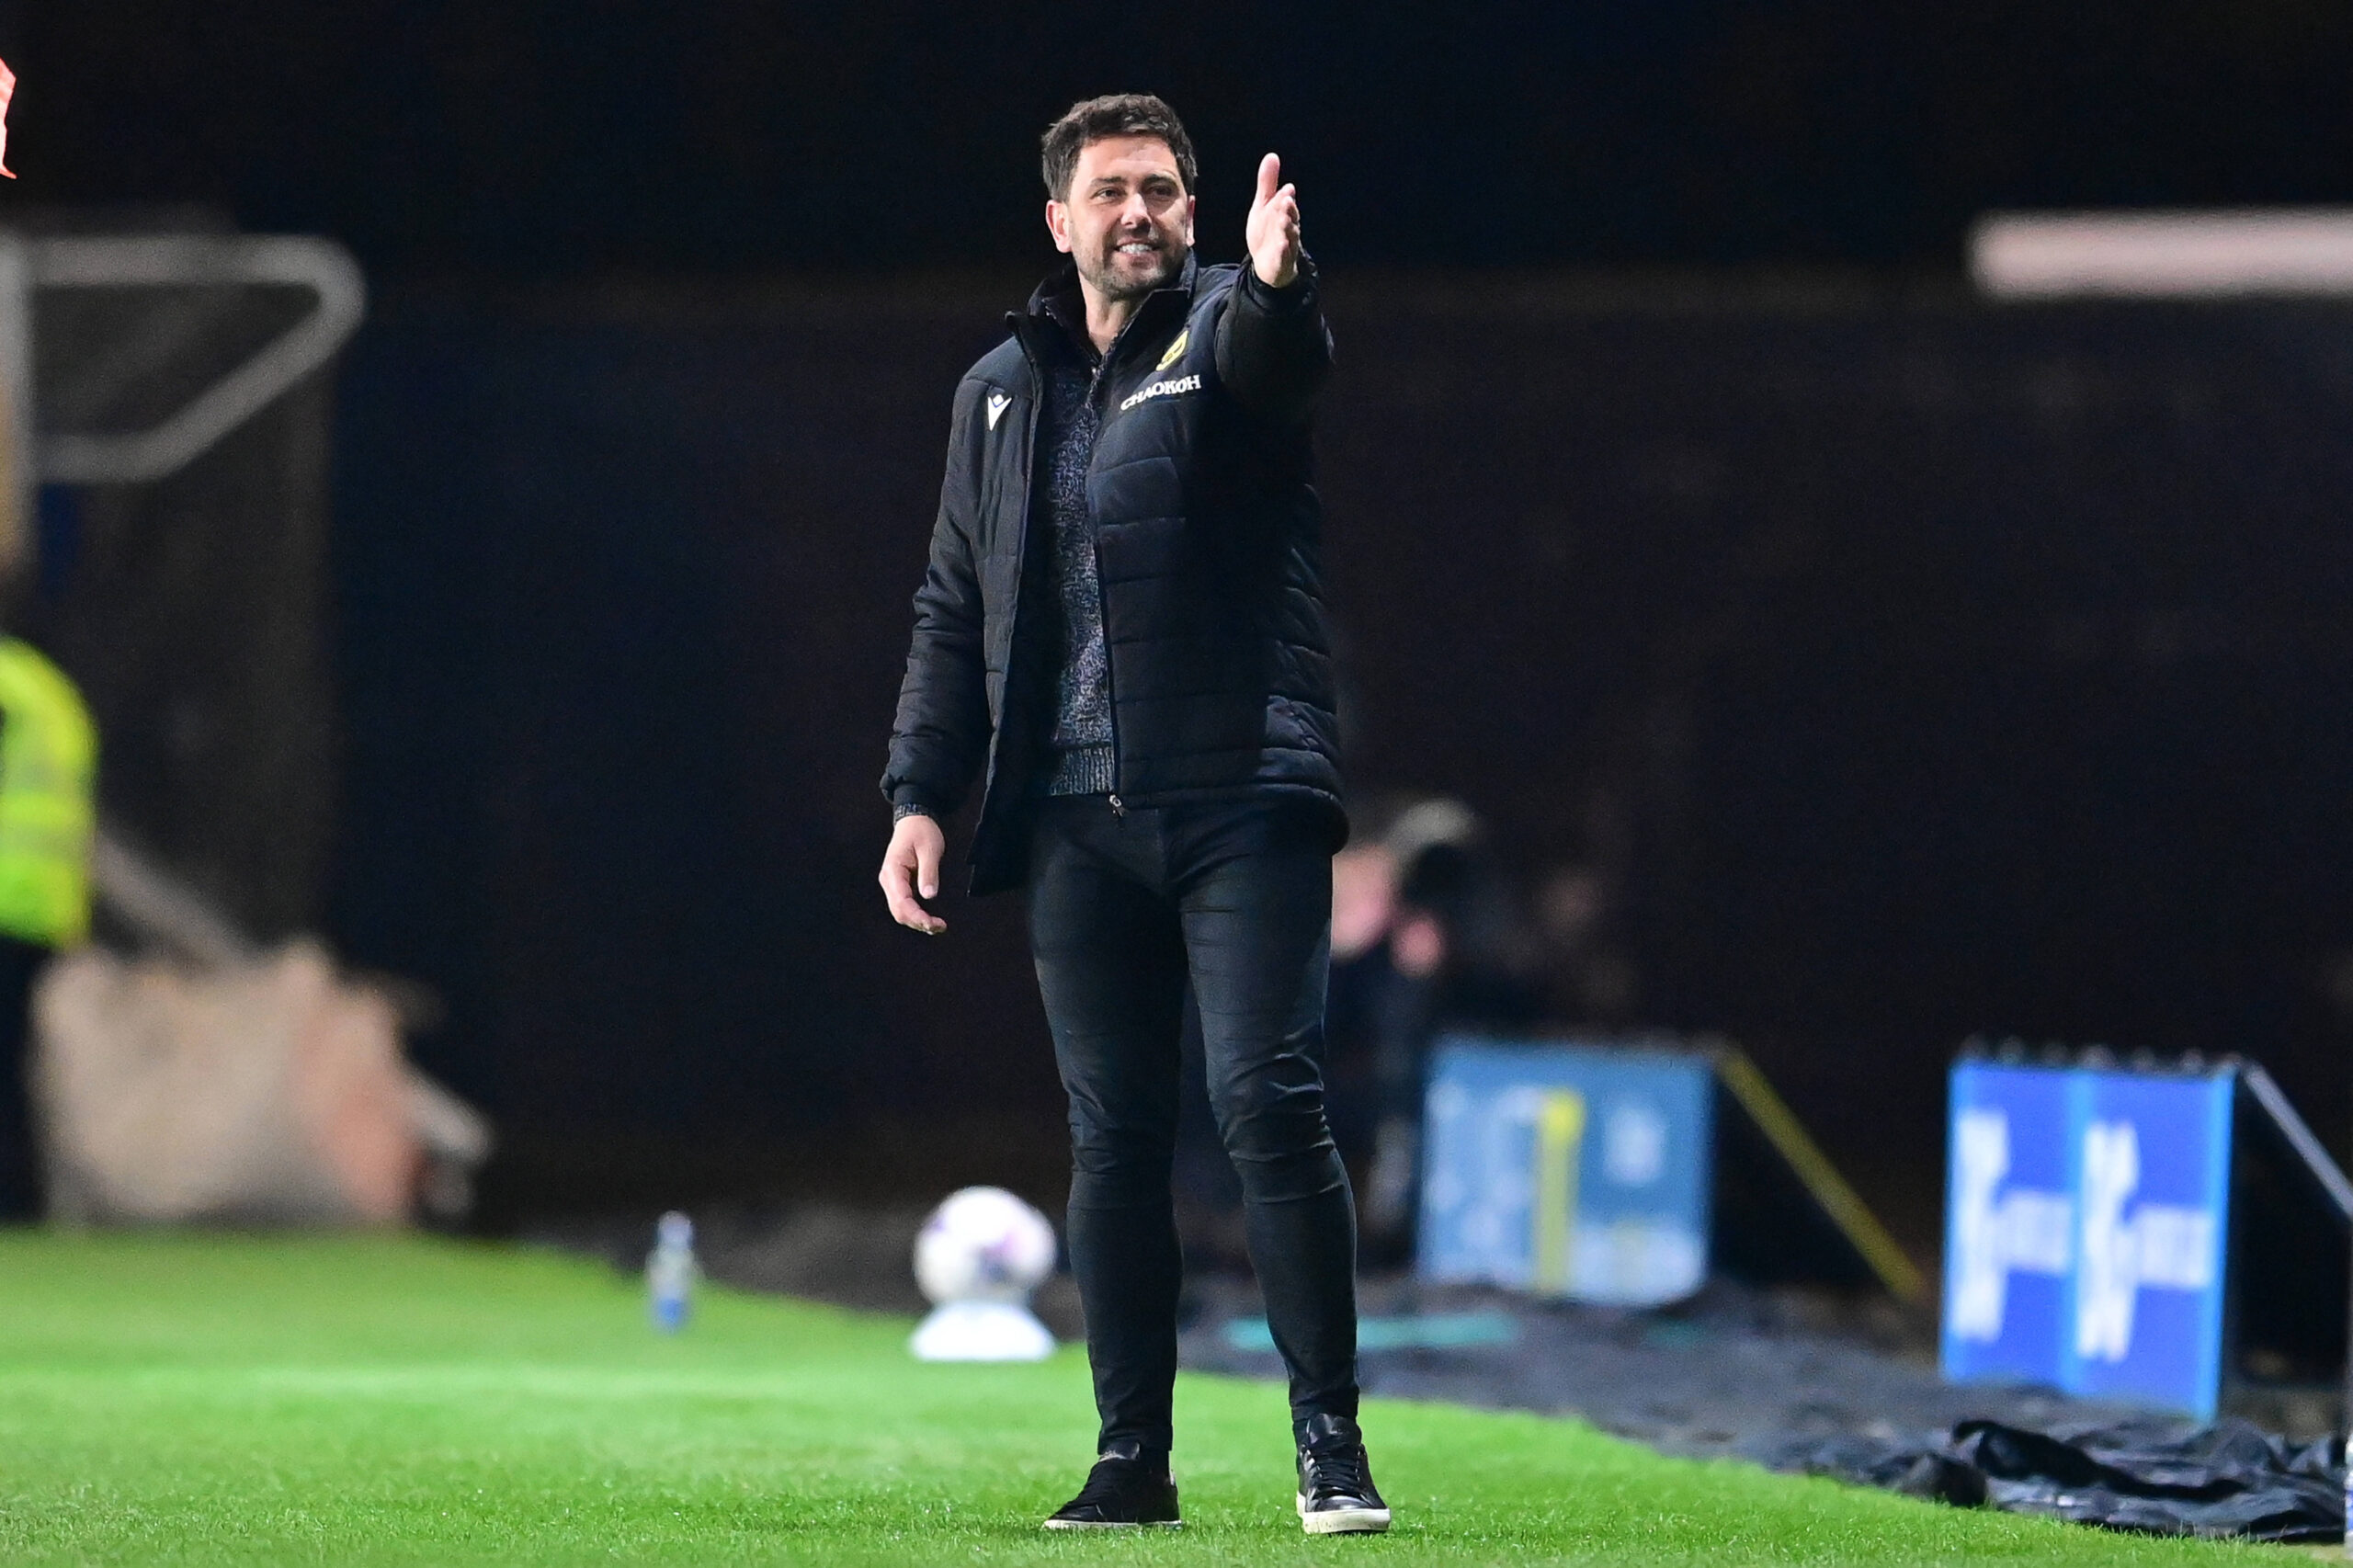 Oxford United Weekly Round-Up: Poor Form Cost Playoff Position